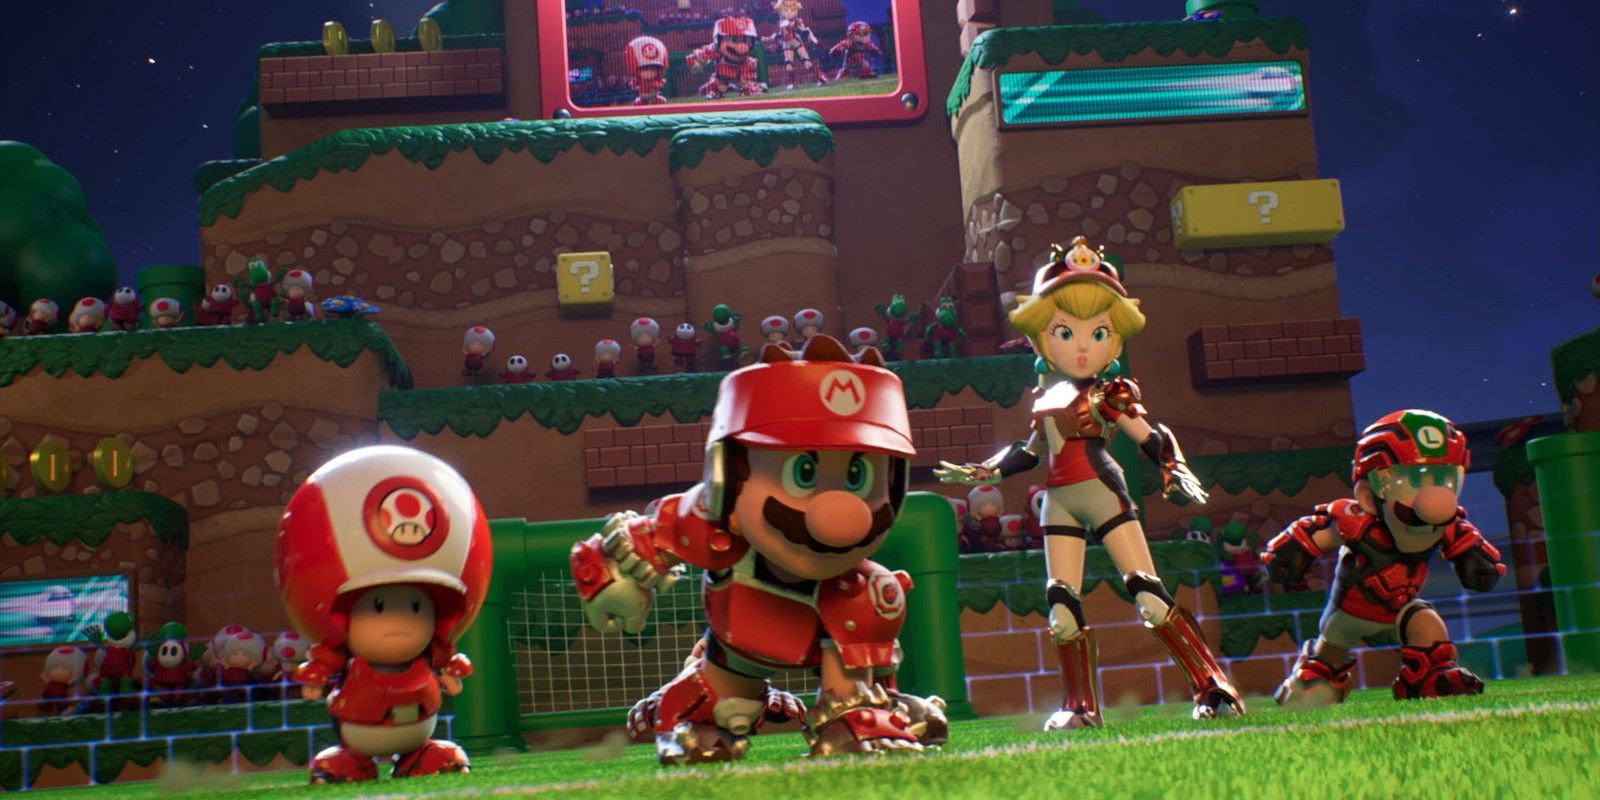 Toad, Mario, Peach, and Luigi lining up on the pitch in anticipation of a Mario Strikers: Battle League match starting.